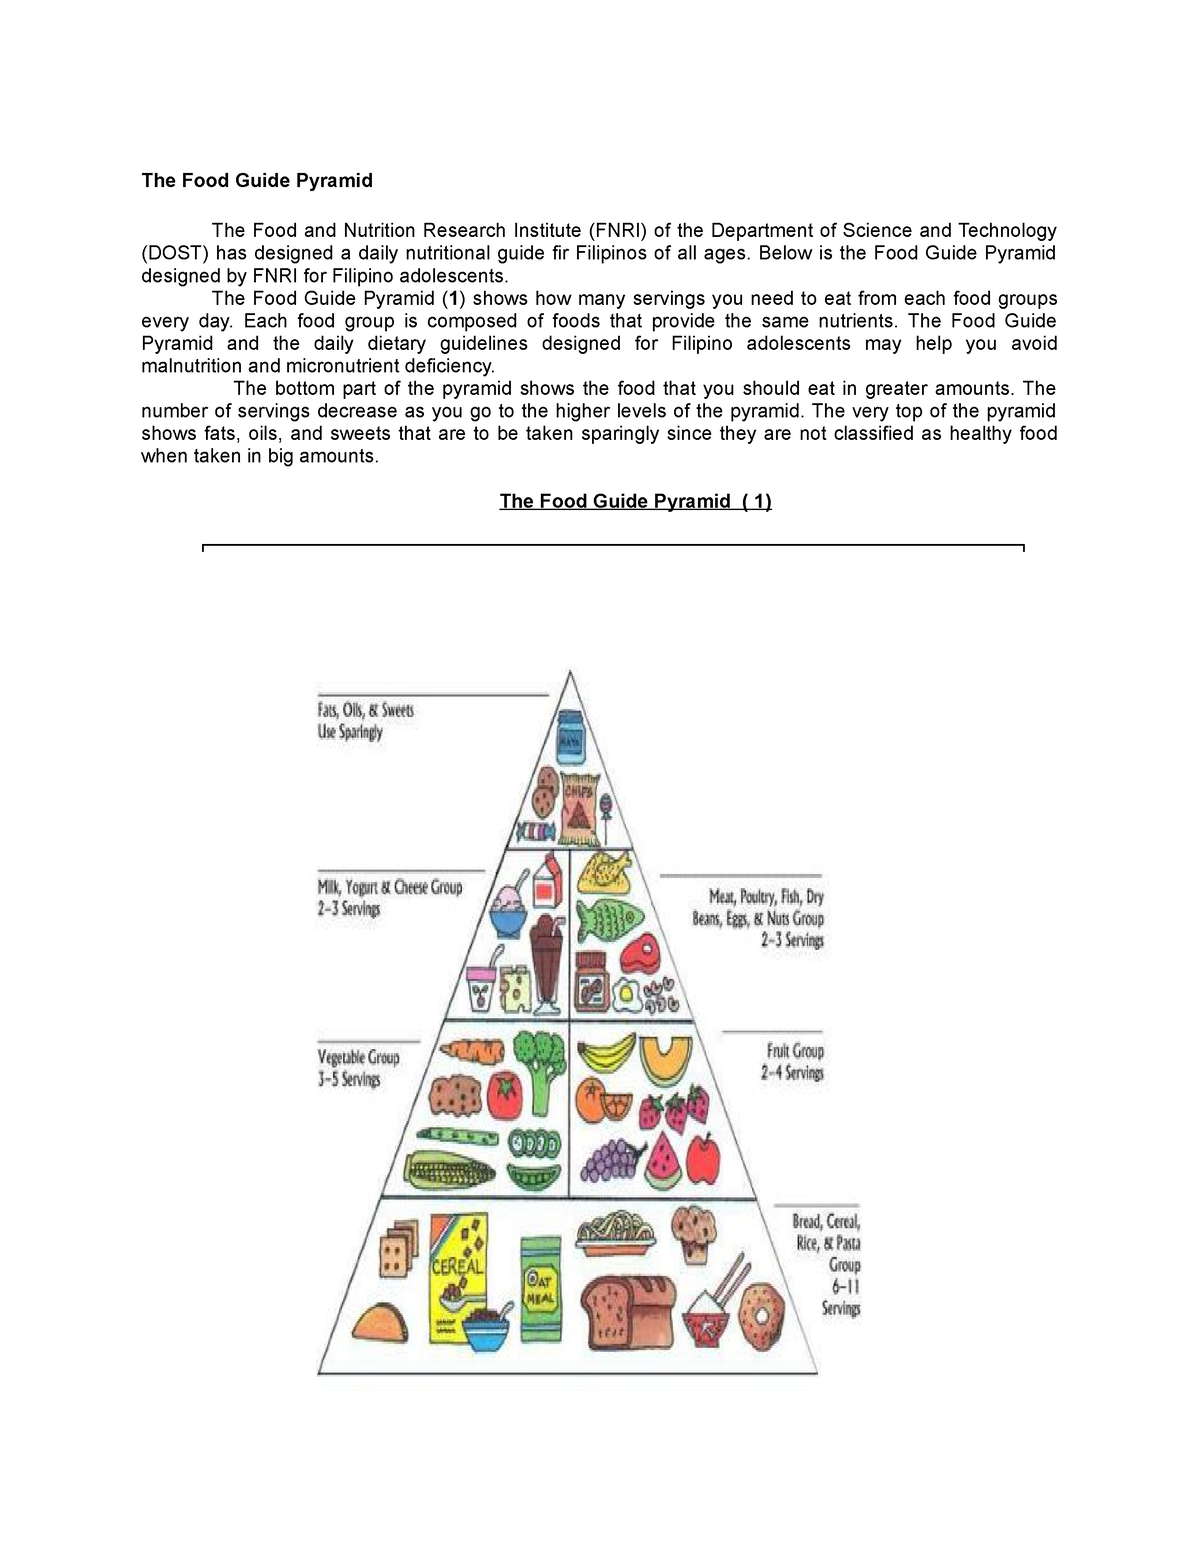 The Food Guide Pyramid Below Is The Food Guide Pyramid Designed By